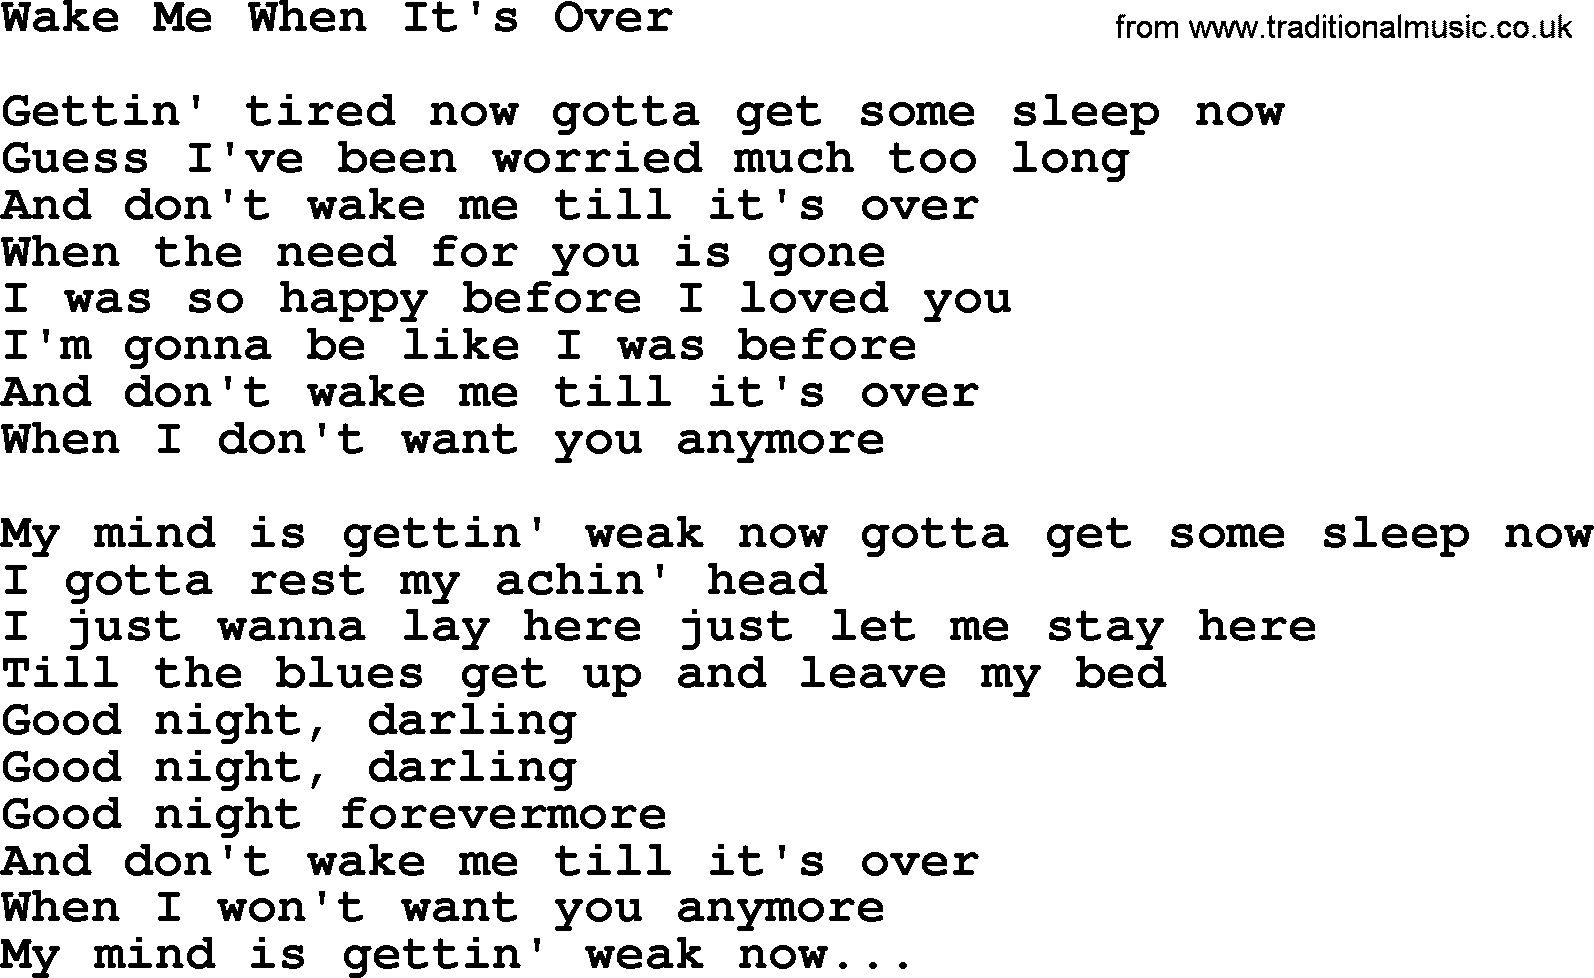 Willie Nelson song: Wake Me When It's Over lyrics